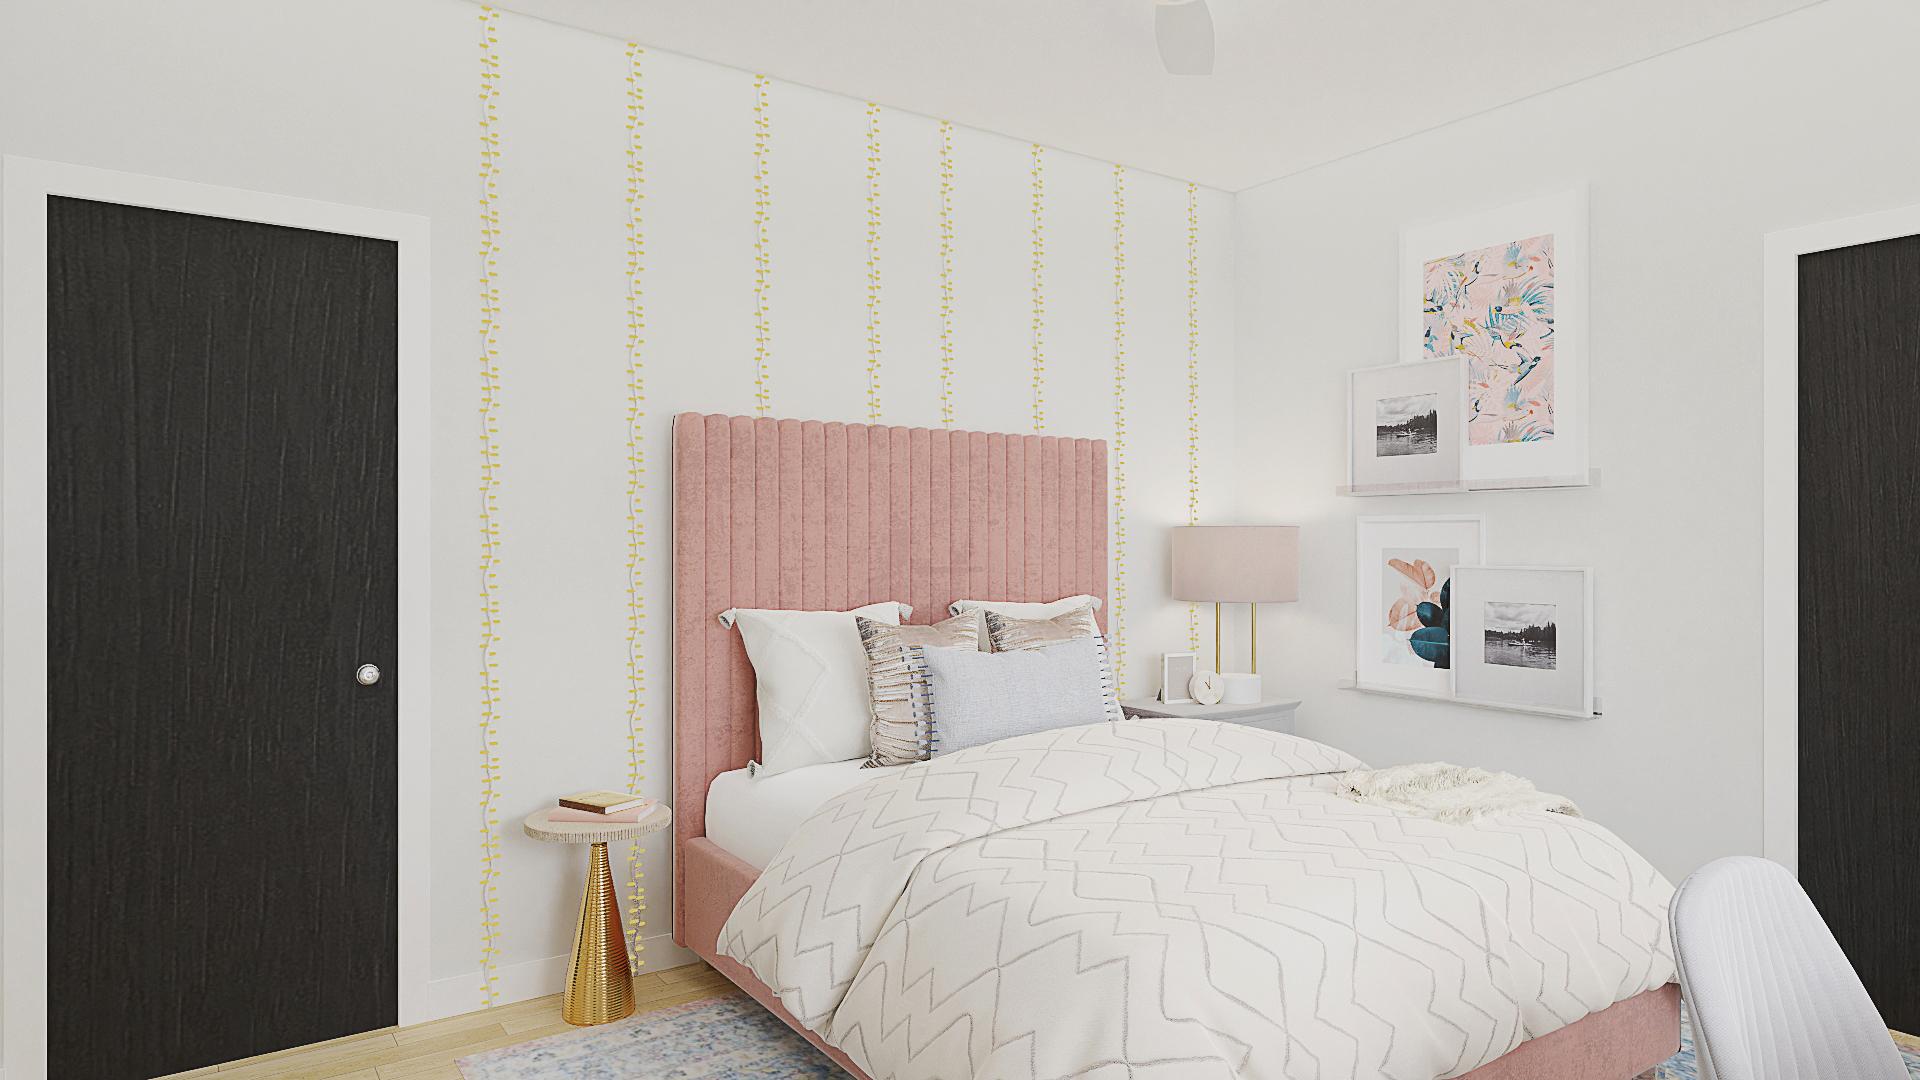 A Glam Bedroom Blushing In Pink Tones